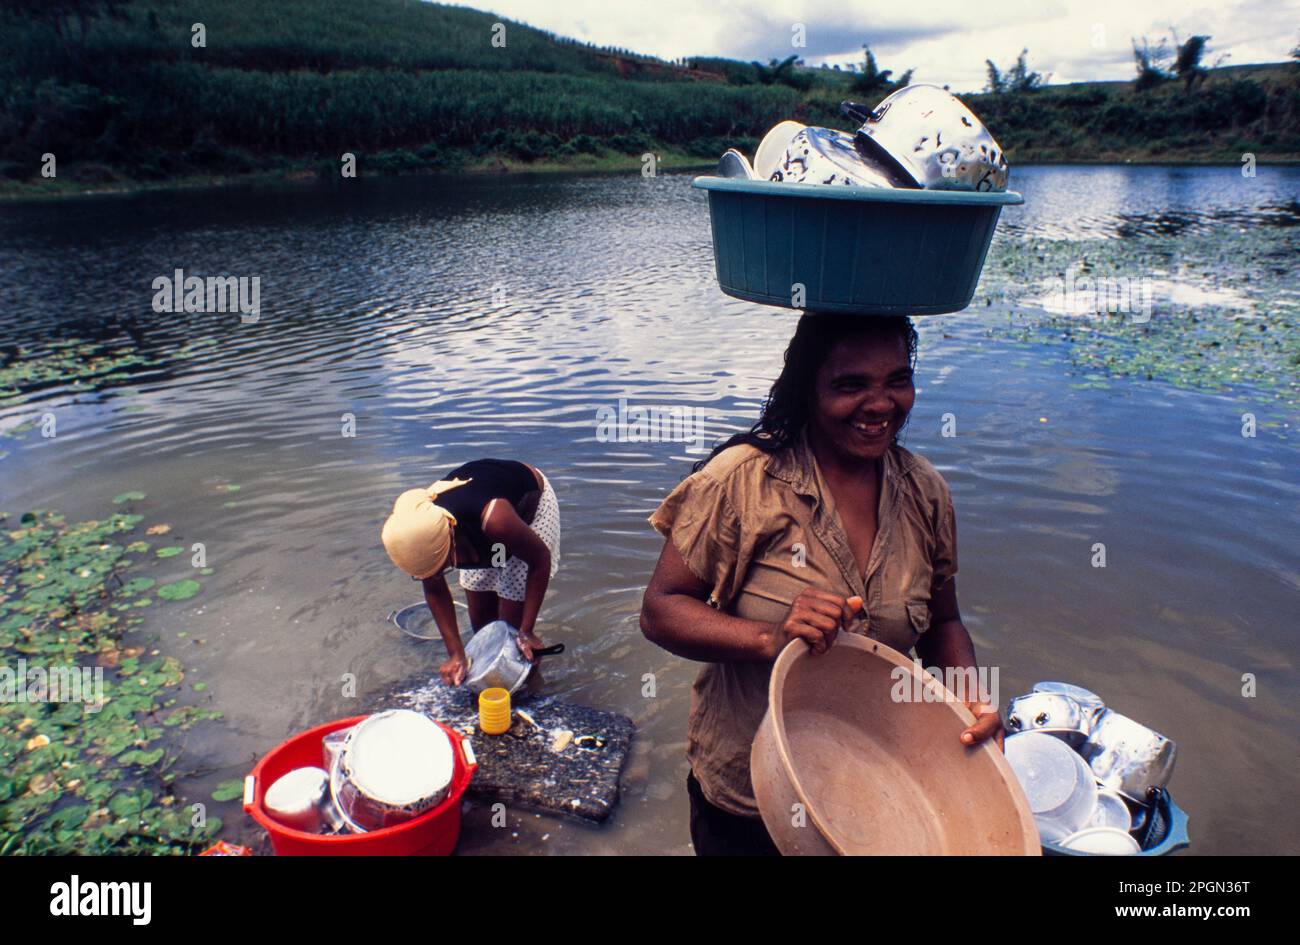 Daily life in countryside Northeastern Brazil, Black women wash the dishes in the river, toothless woman smiles joyfully, Palmares, Pernambuco State. Stock Photo